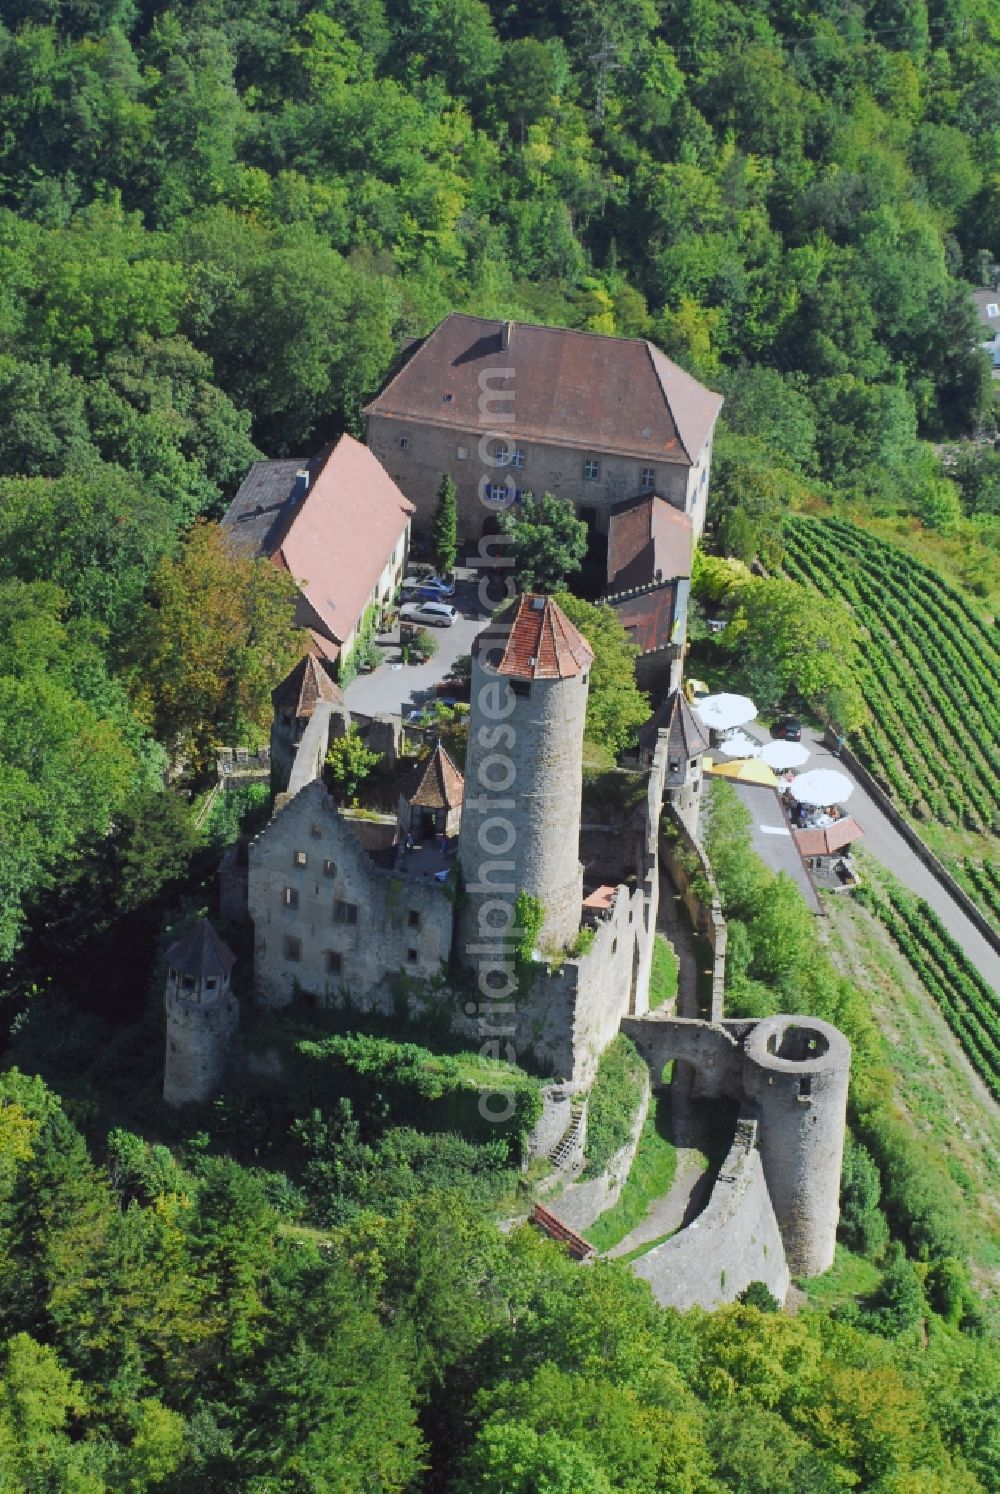 Neckarzimmern from above - Ruins and vestiges of the former castle and fortress Burg Hornberg in Neckarzimmern in the state Baden-Wuerttemberg, Germany